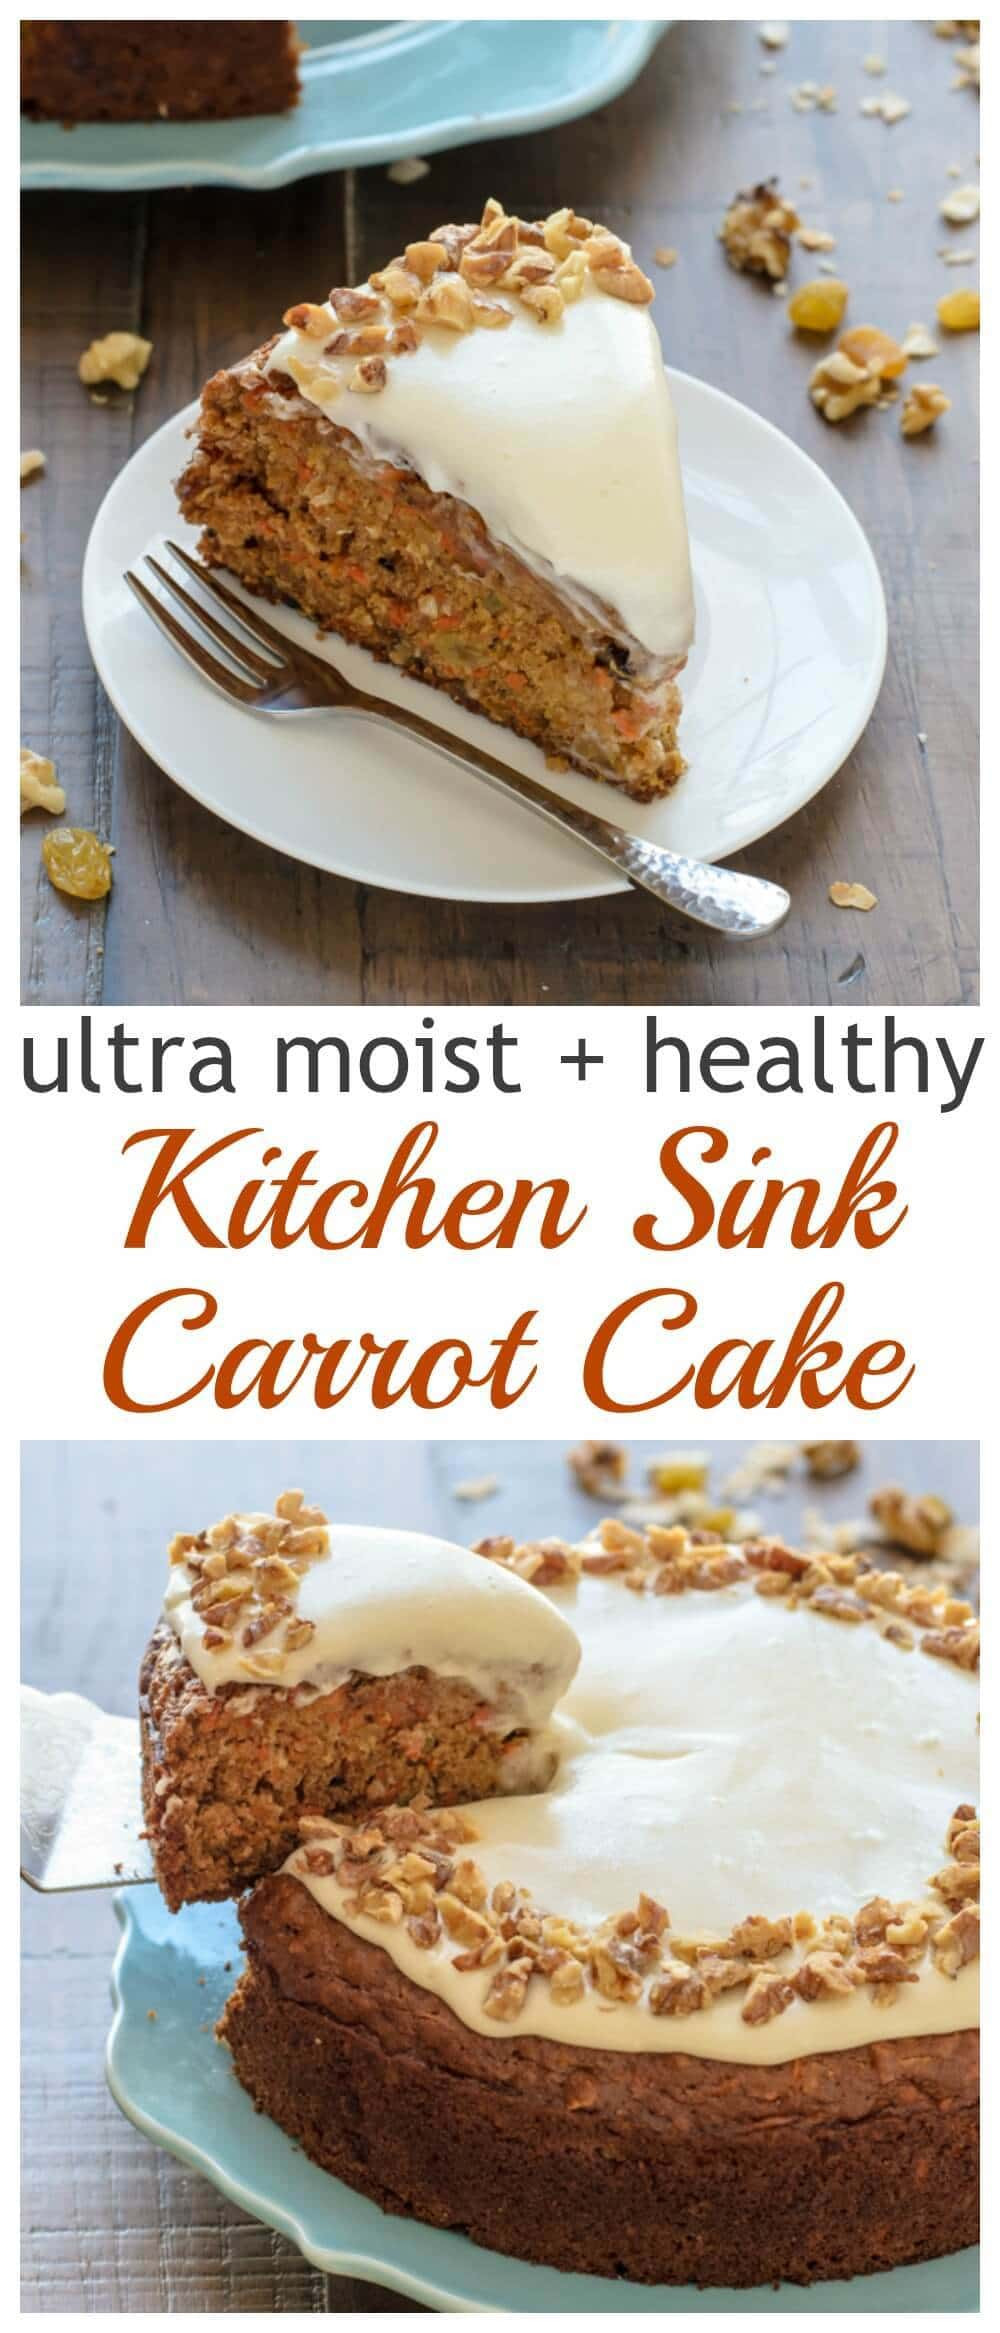 Best Healthy Carrot Cake Recipe
 Healthy Carrot Cake with Light Cream Cheese Frosting